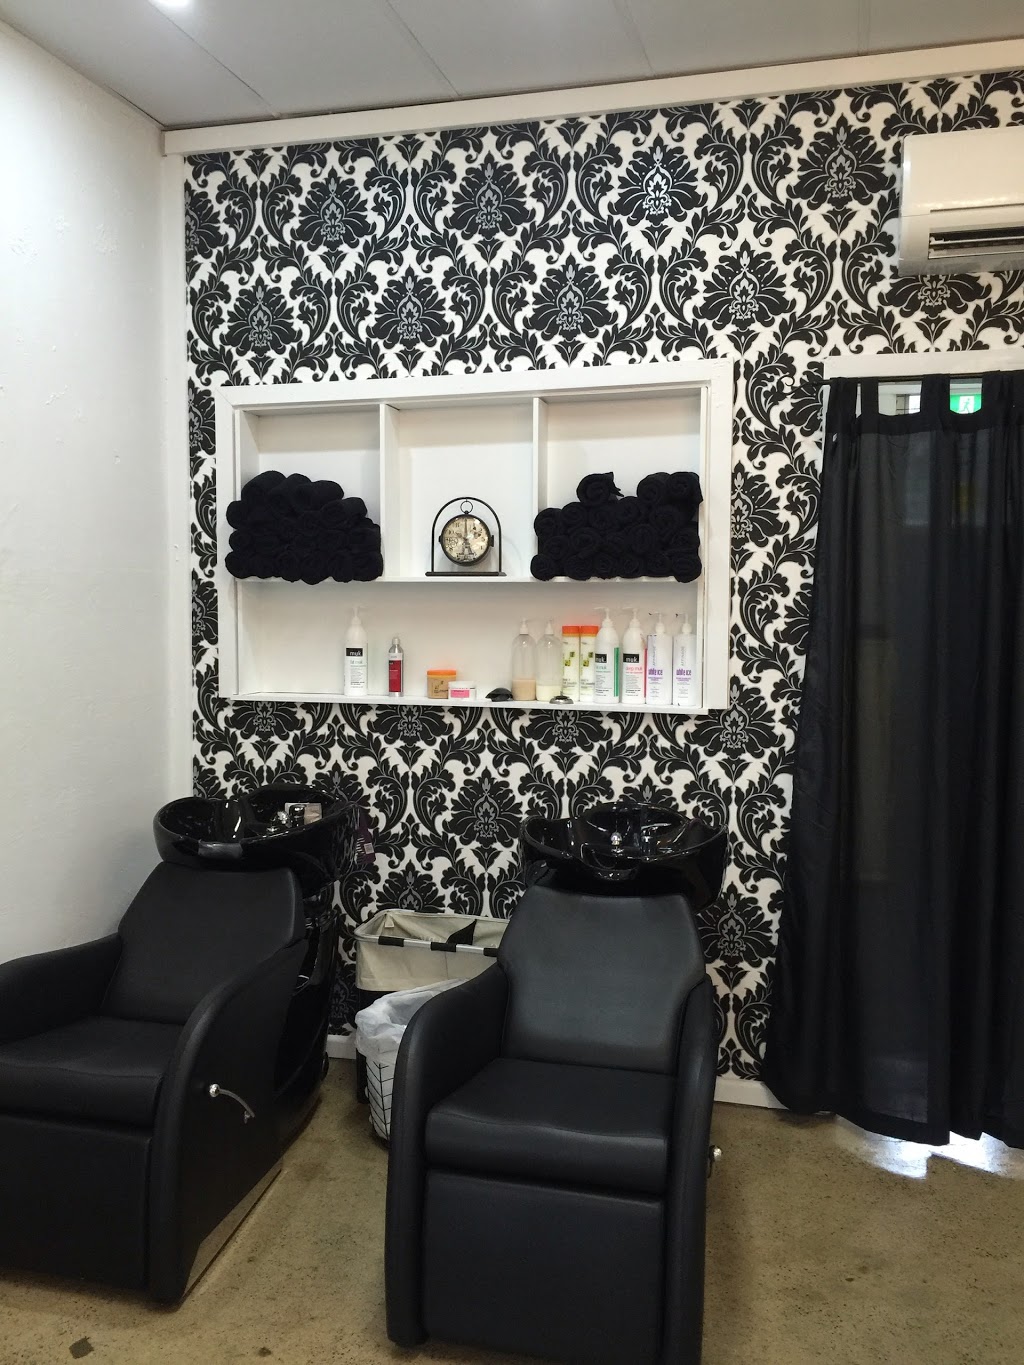 Beyond Bella Hair and Beauty | hair care | 52 Forest Rd, Melbourne VIC 3156, Australia | 0397783414 OR +61 3 9778 3414